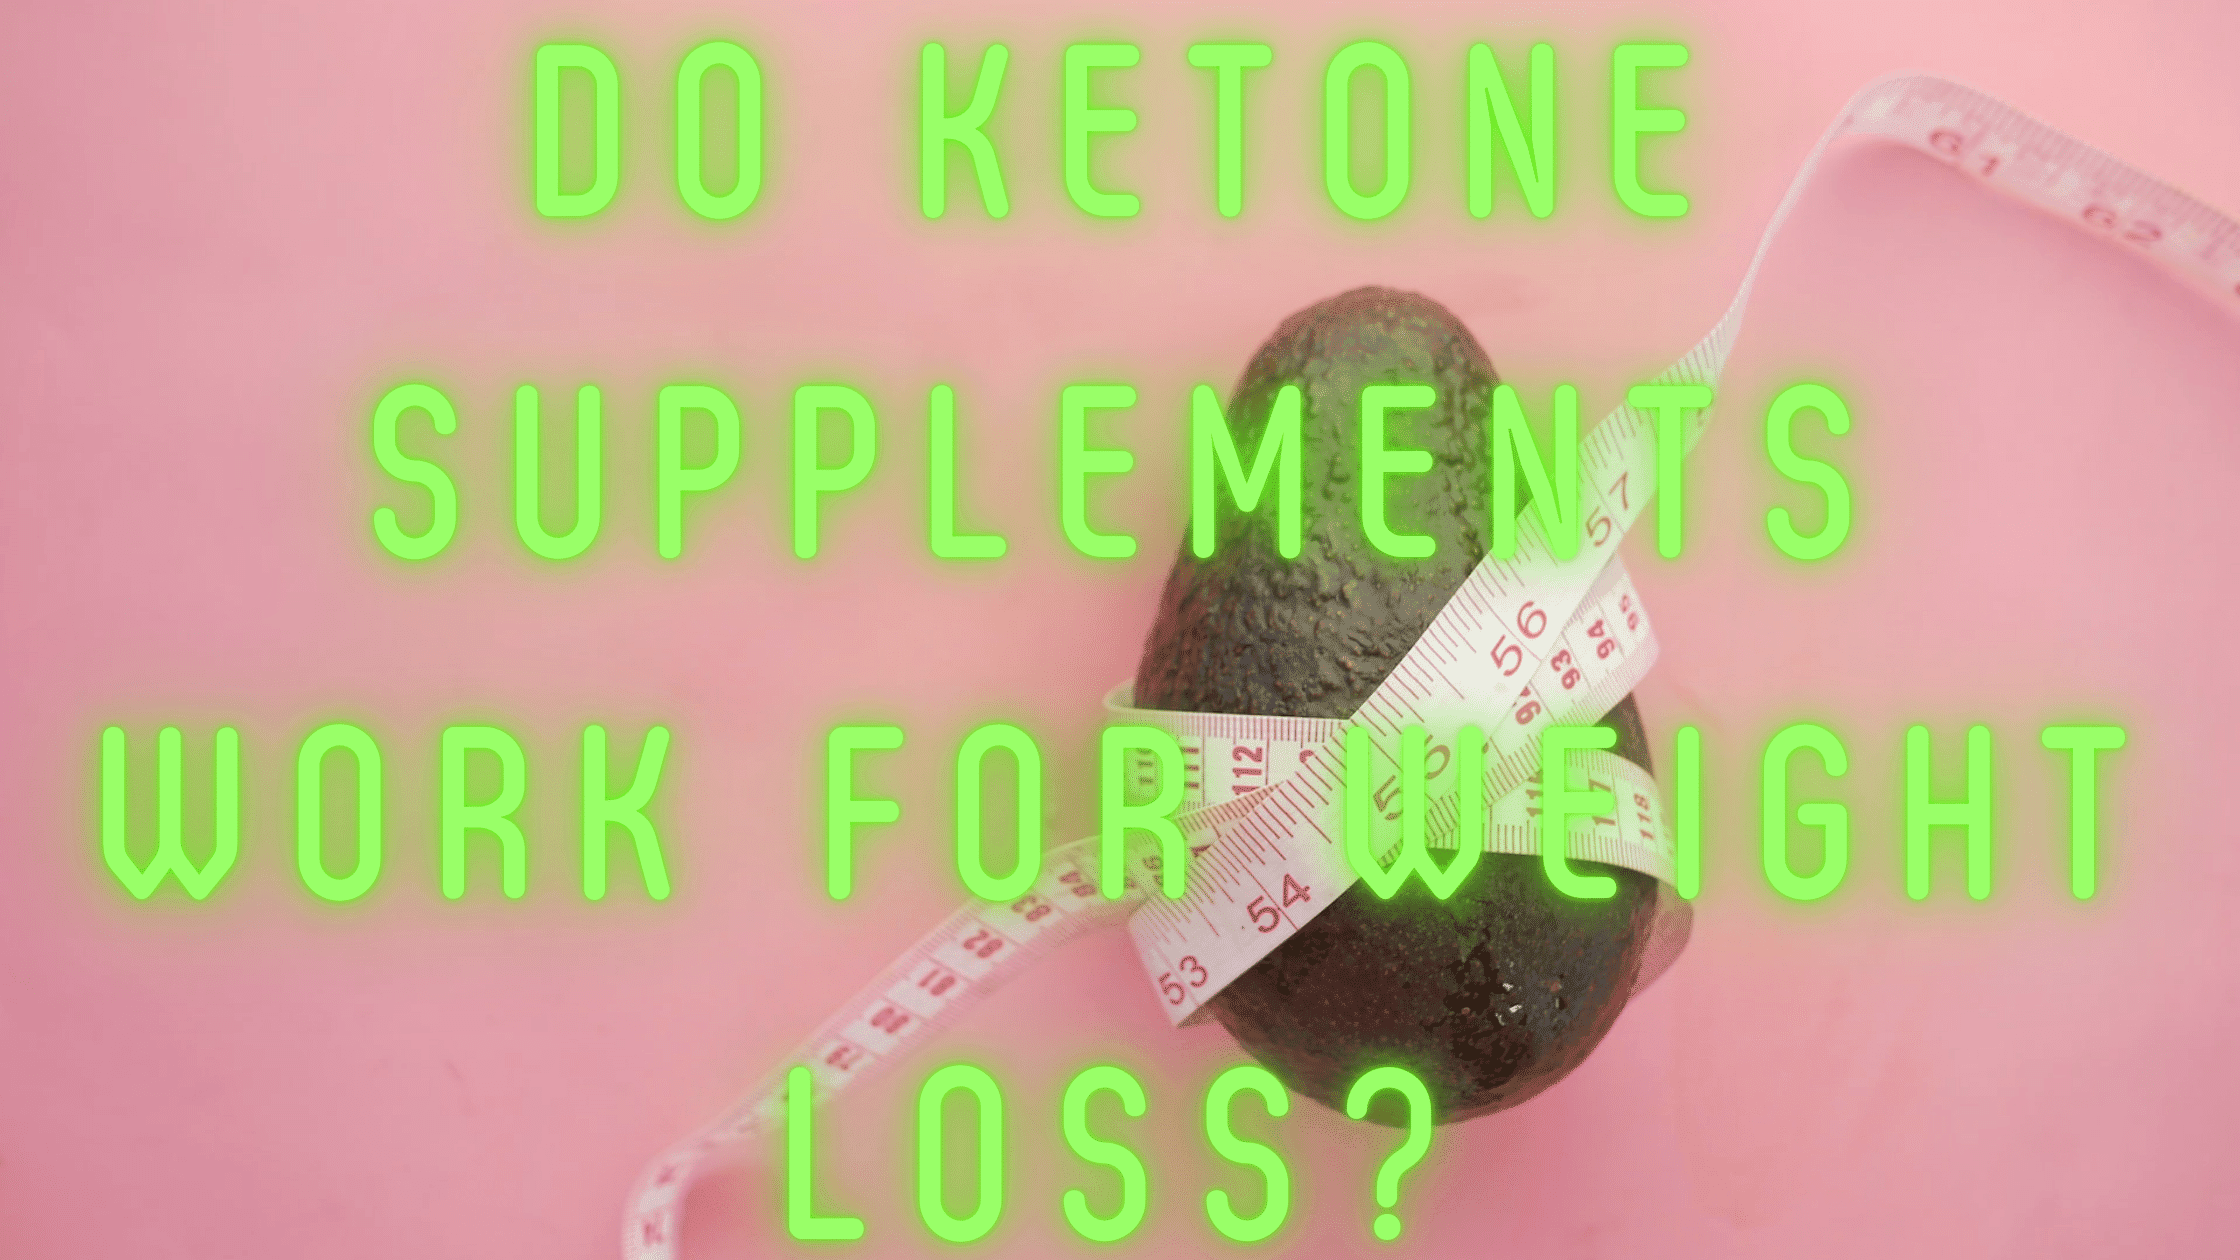 Do ketone supplements work for weight loss